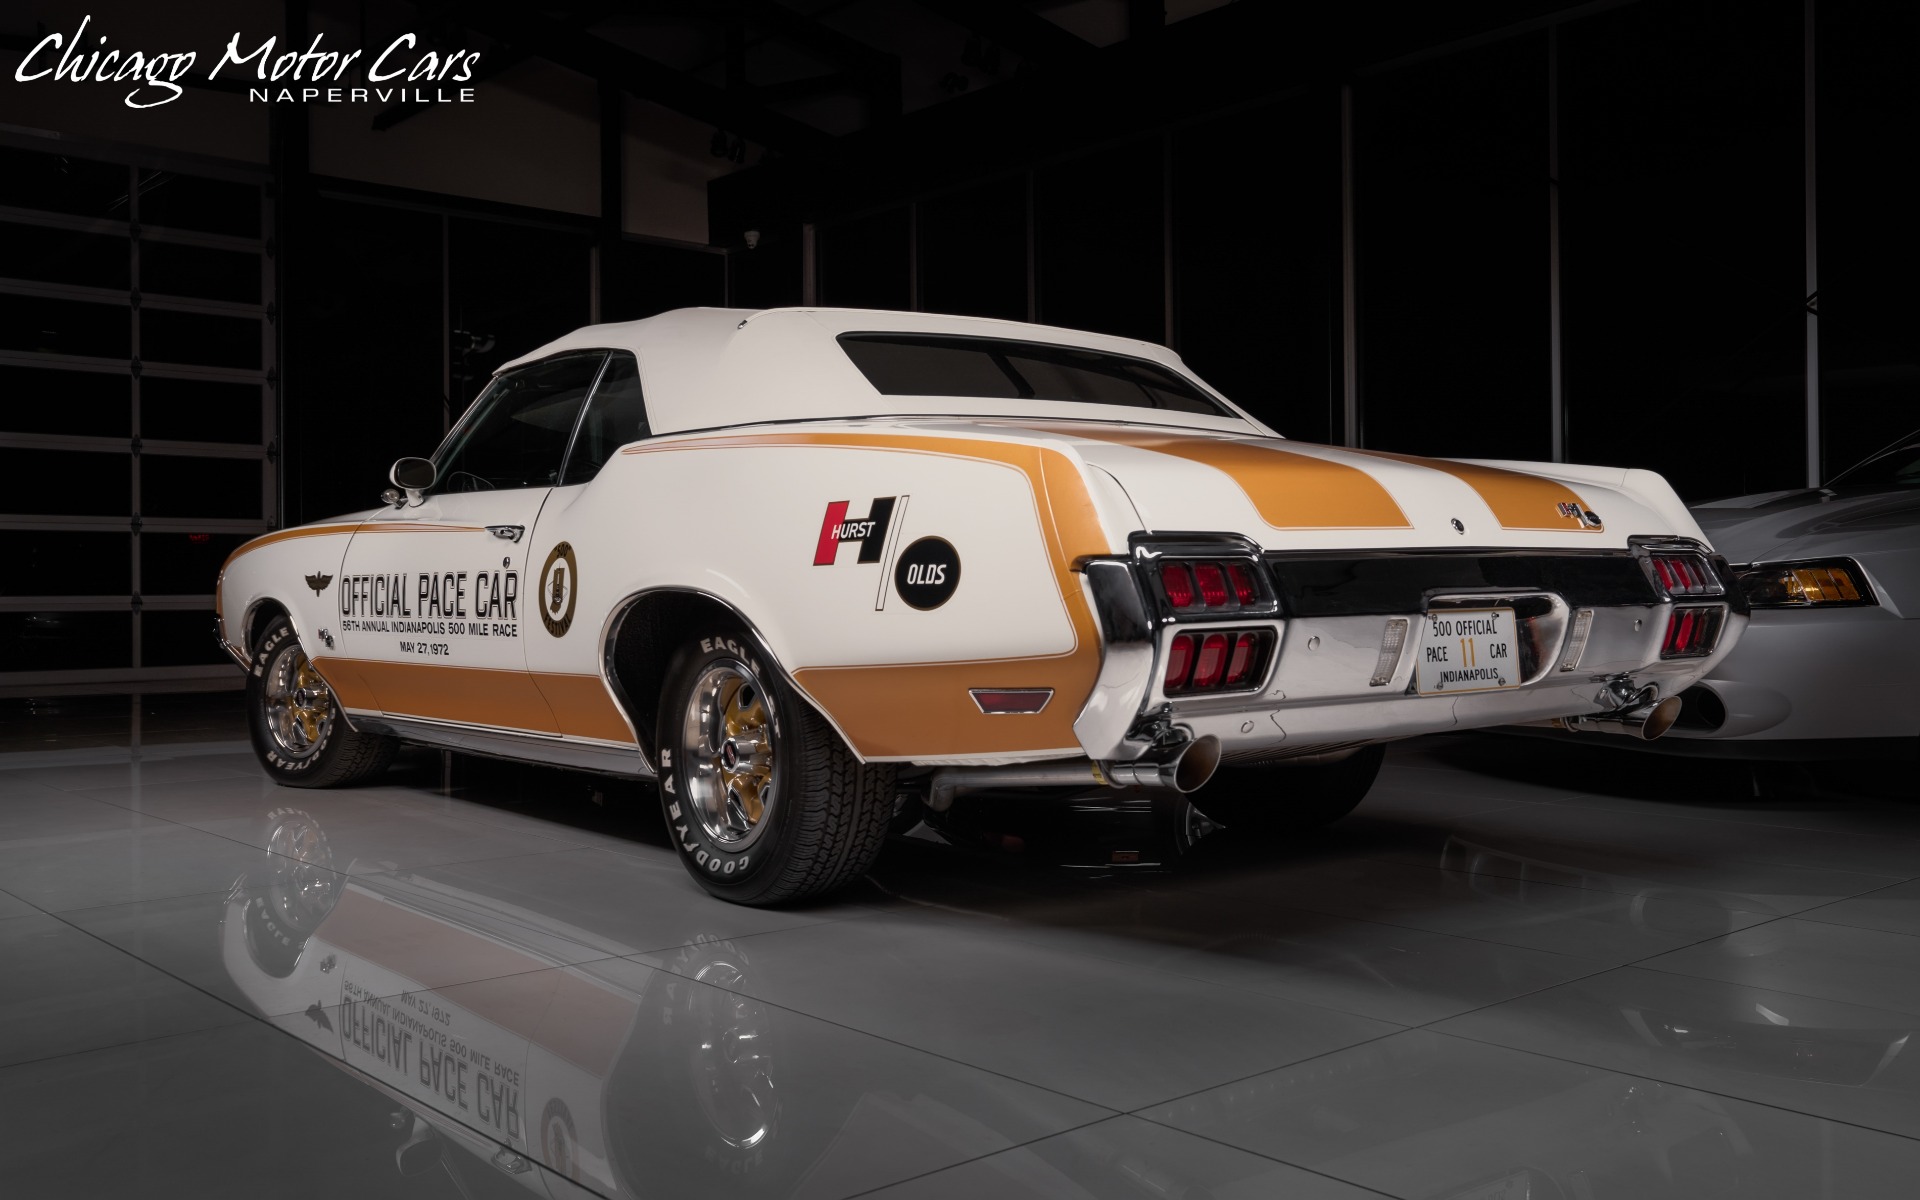 Used-1972-Oldsmobile-Convertible-HurstOlds-Car--11-of-54-Indy-500-Festival-Pace-Cars-MCACN-Gold-Winner